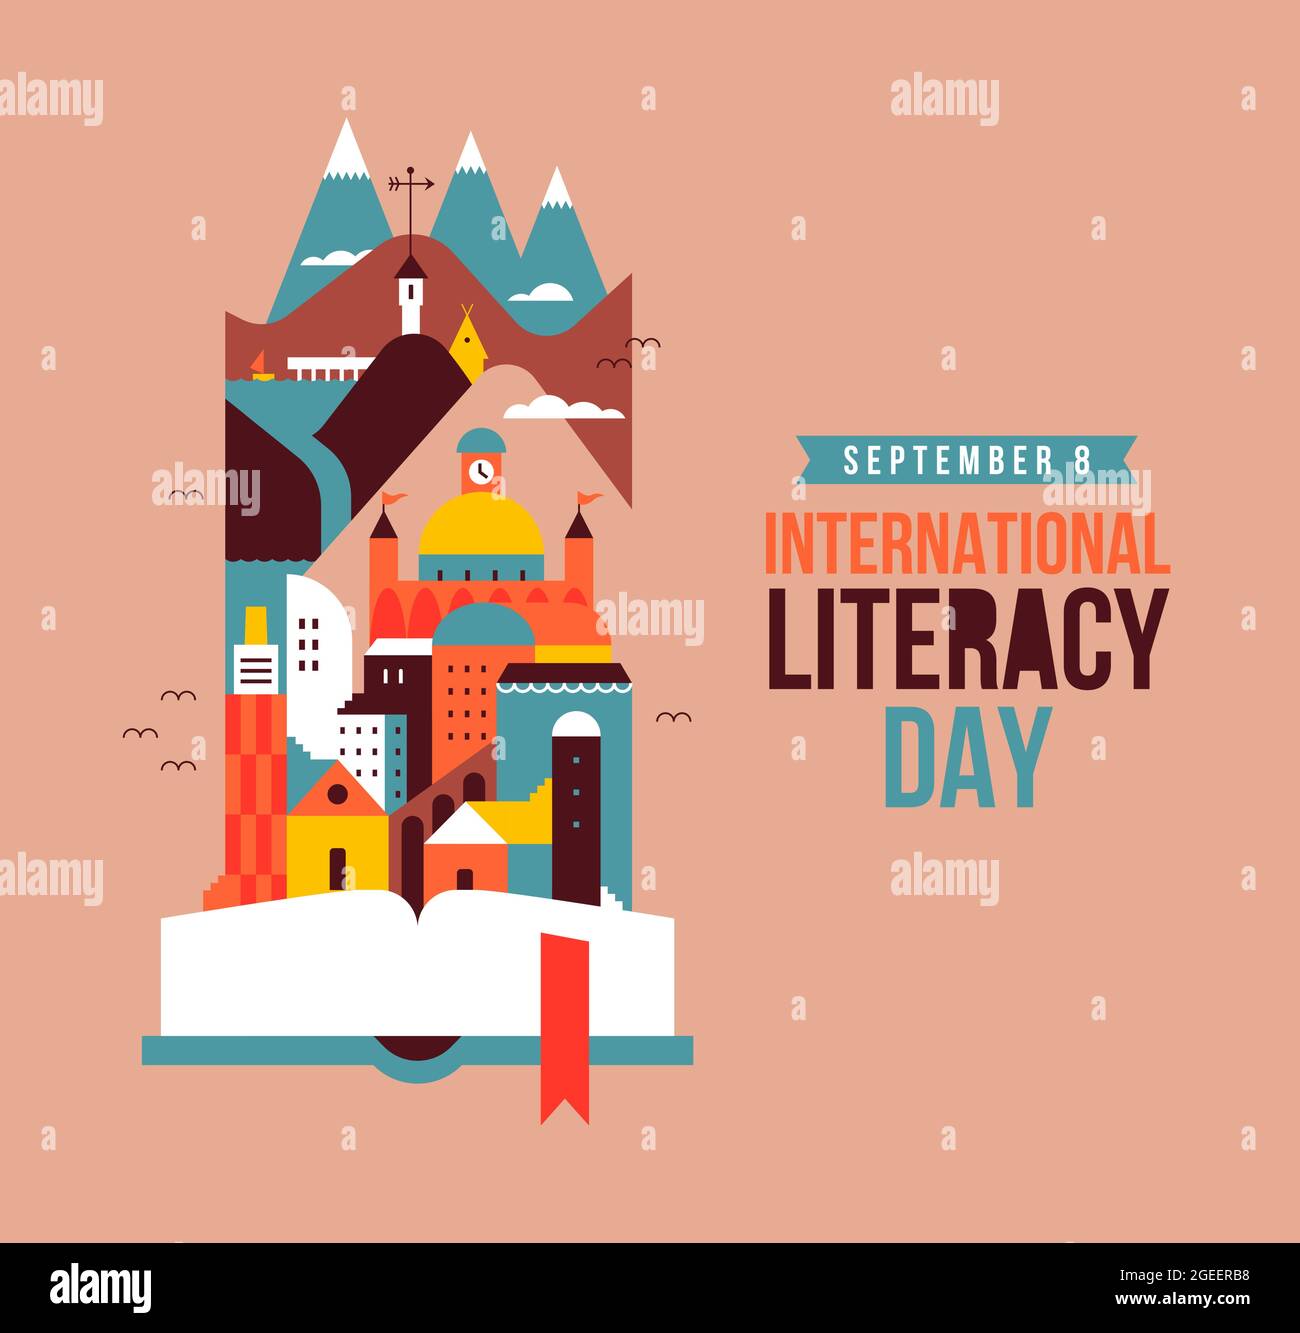 Literacy Day greeting card illustration of open book story concept with city and nature landscape. Children education or literature festival design fo Stock Vector